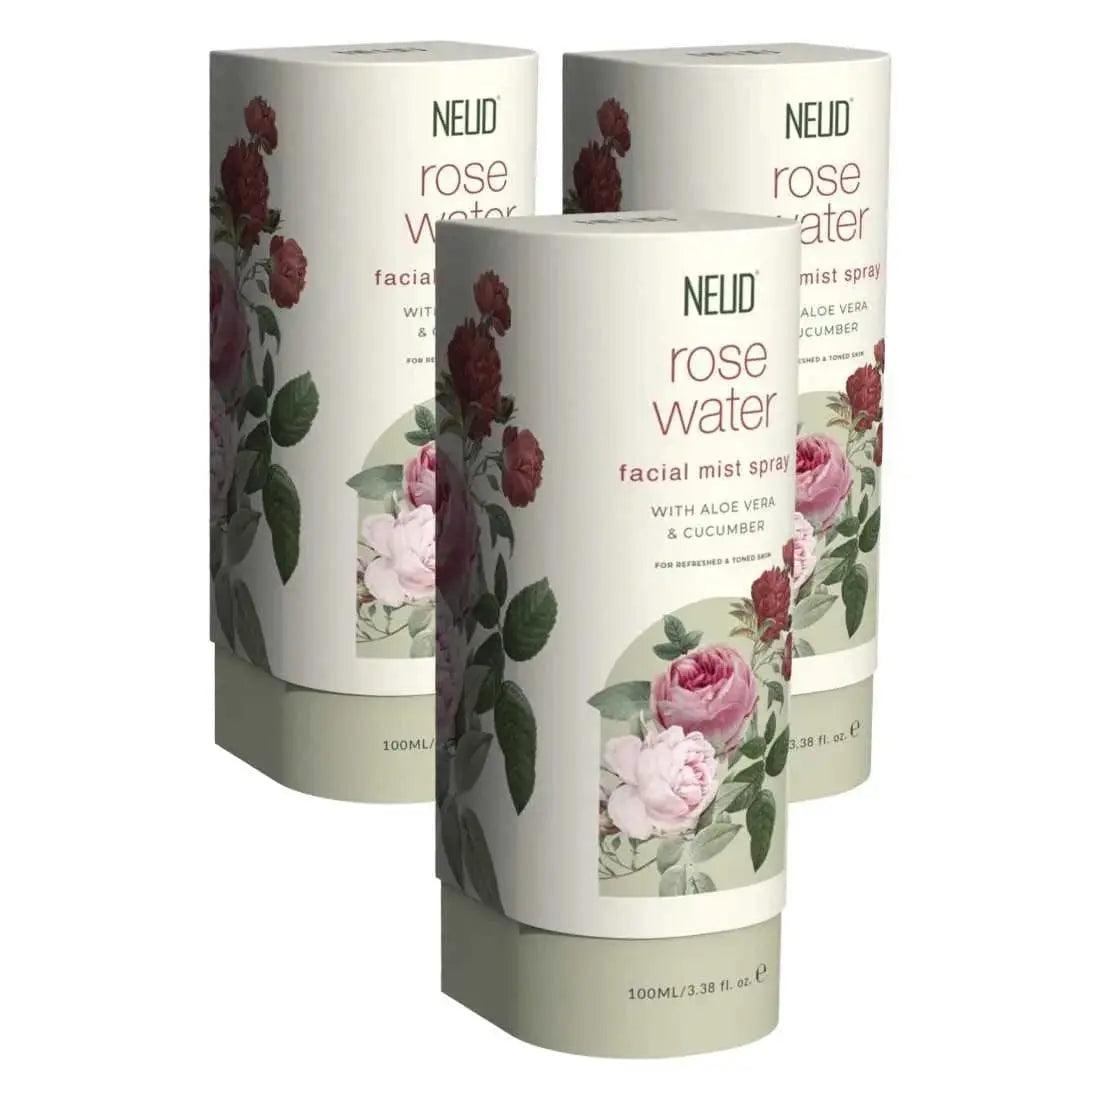 NEUD Rose Water Facial Mist Spray For Refreshed and Toned Skin - 100 ml 9559682313034